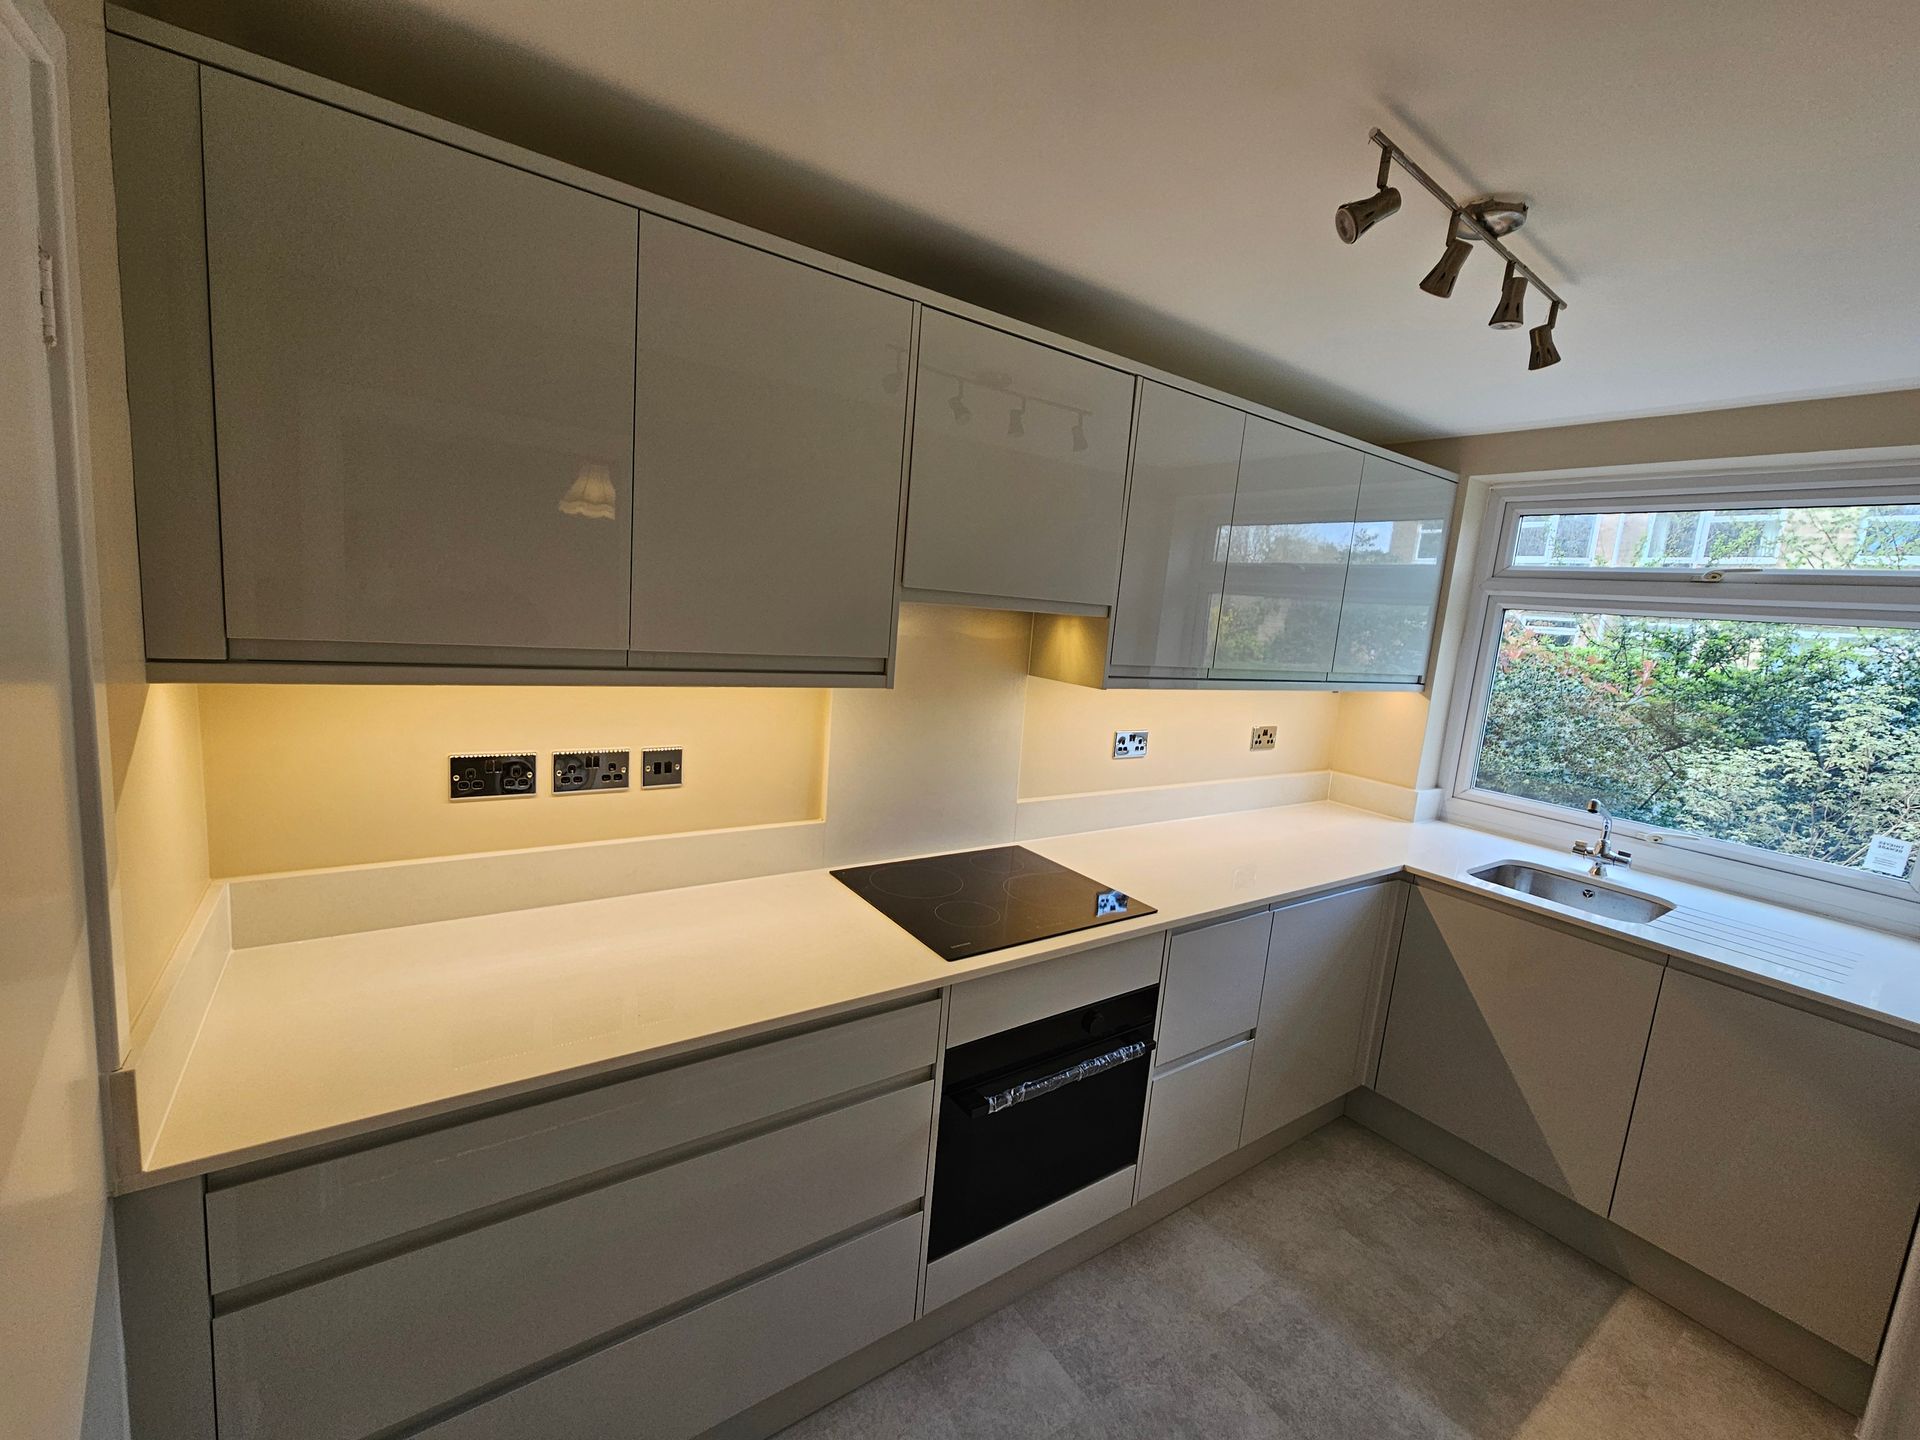 Kitchen and bathroom supplied and installed in Teddington TW11